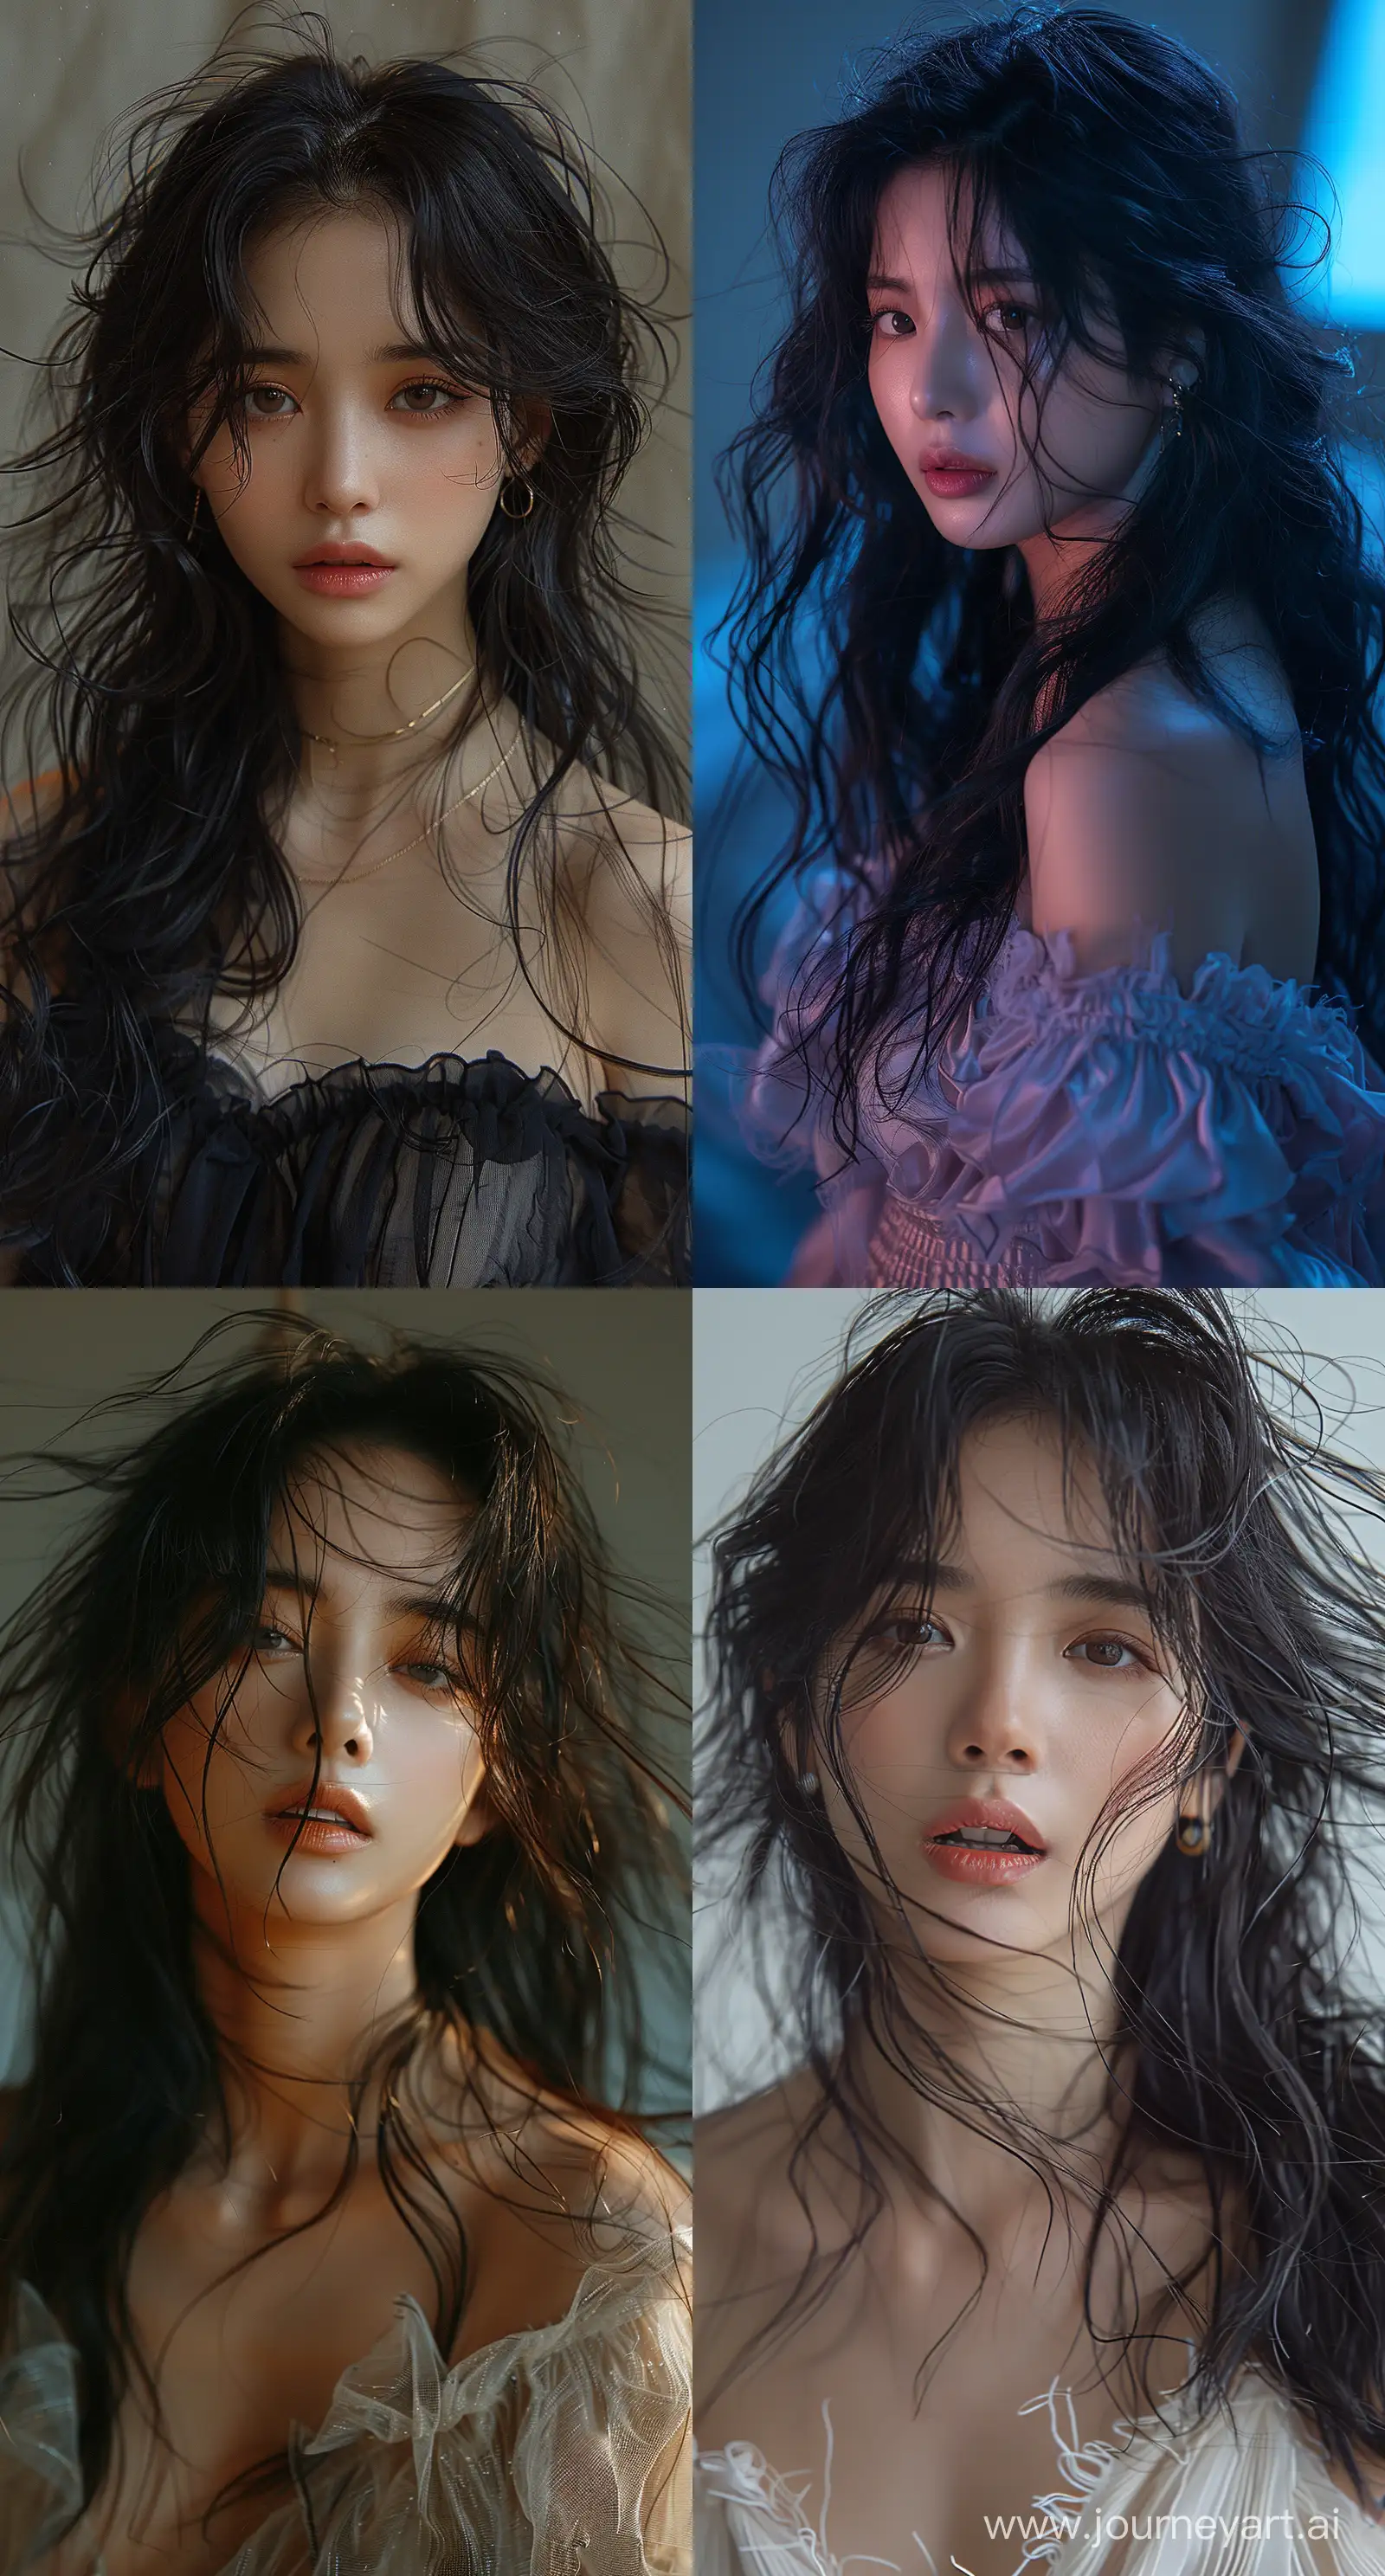 Jennie-Blackpink-Inspired-Portrait-with-Flowing-Black-Hair-and-Raw-Emotions